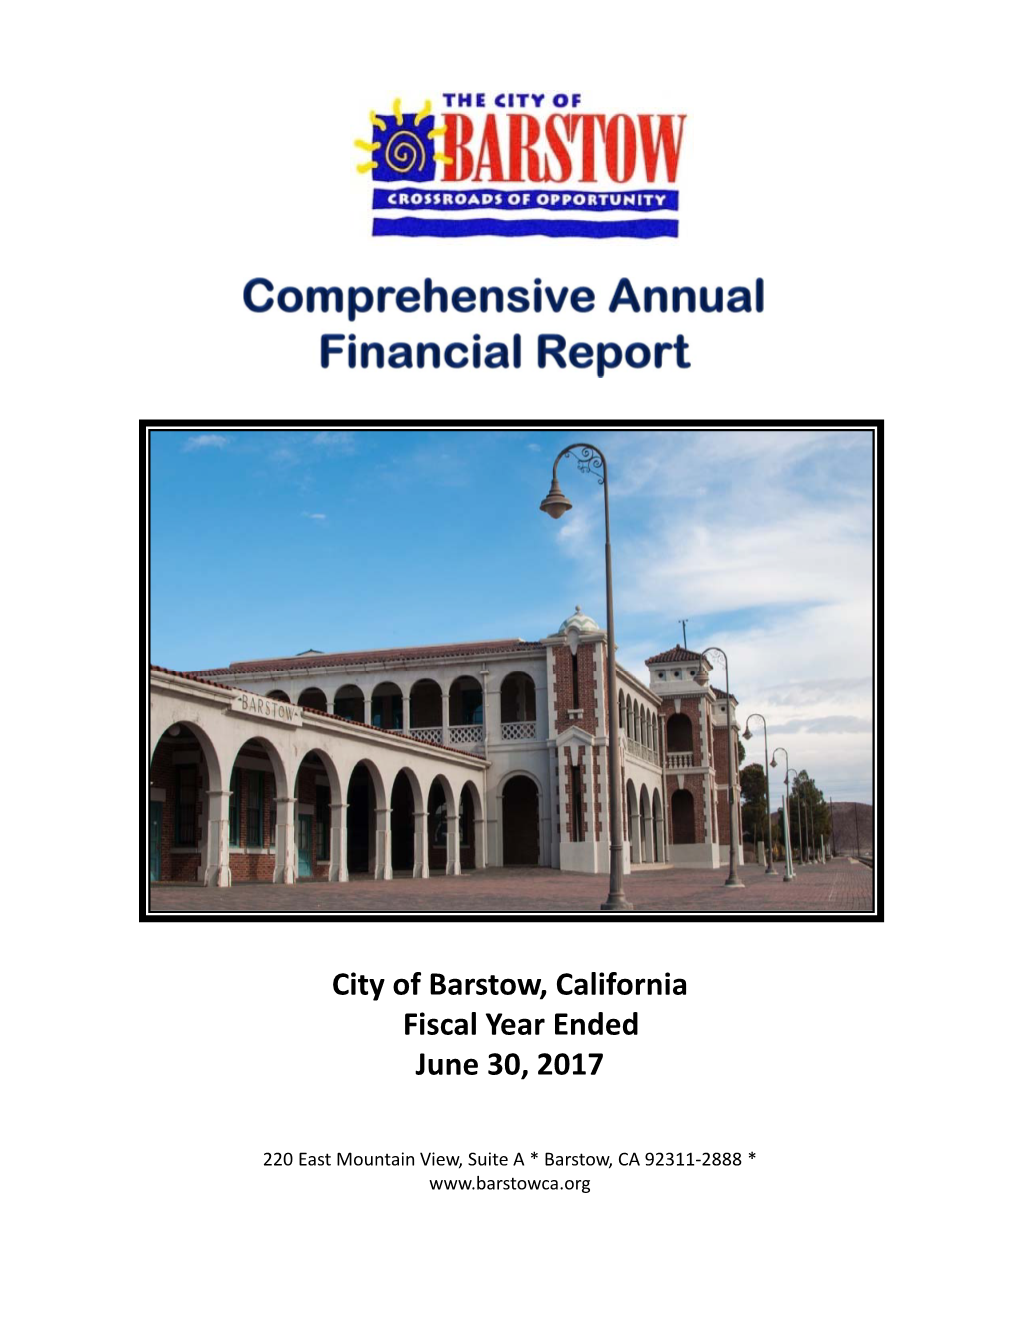 City of Barstow, California Fiscal Year Ended June 30, 2017